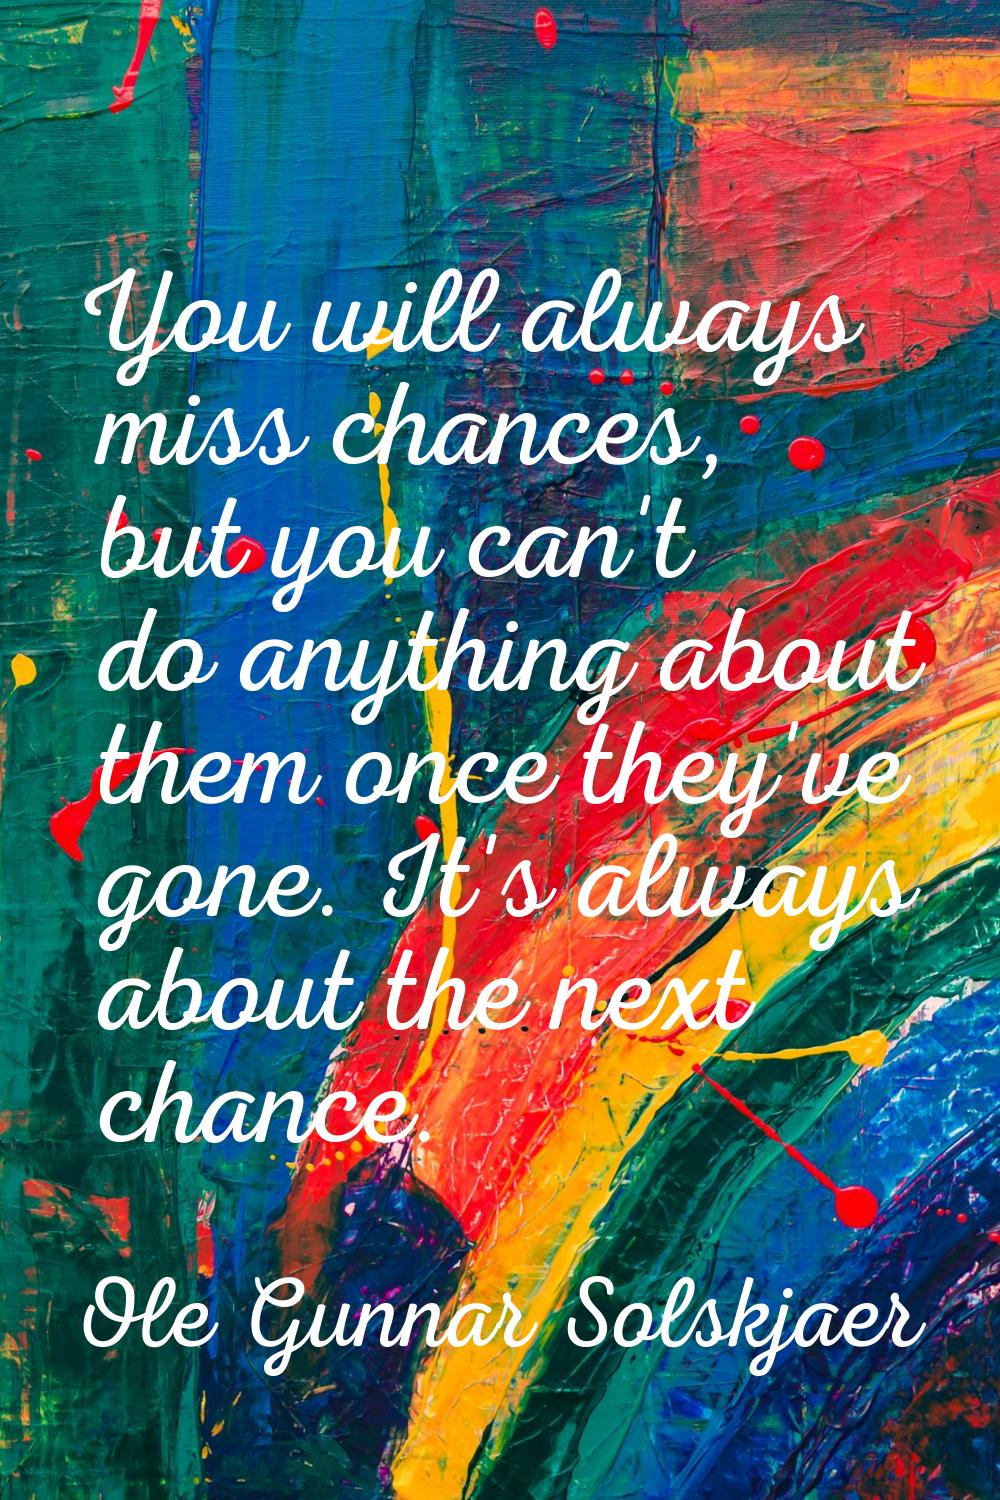 You will always miss chances, but you can't do anything about them once they've gone. It's always a